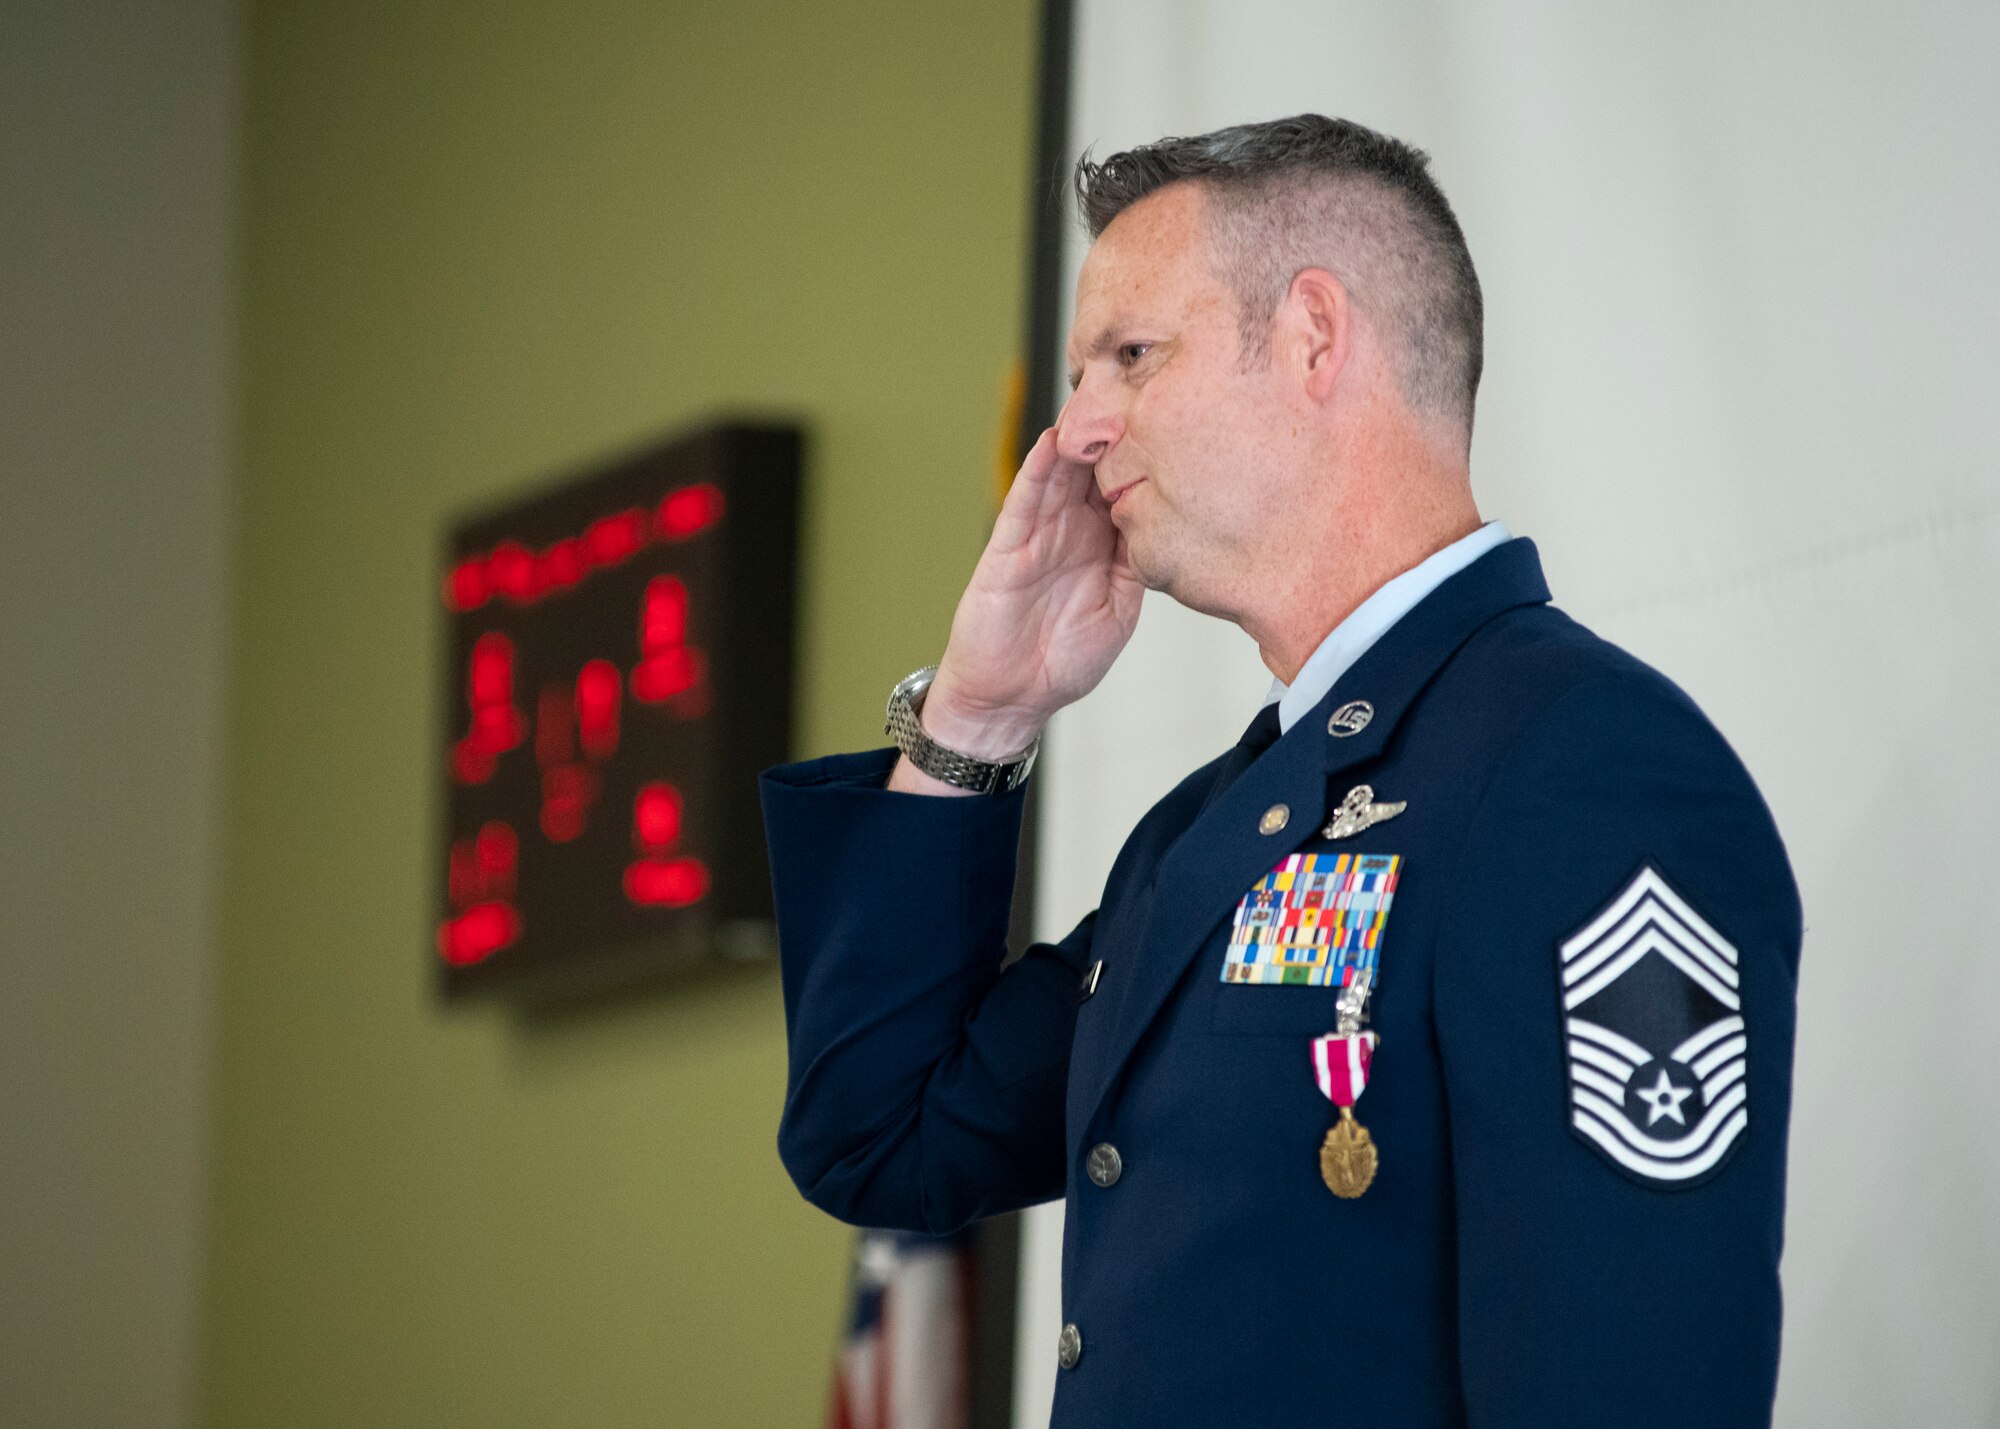 Chief Master Sgt. Scott E. Yoder salutes the audience at his retirement ceremony.